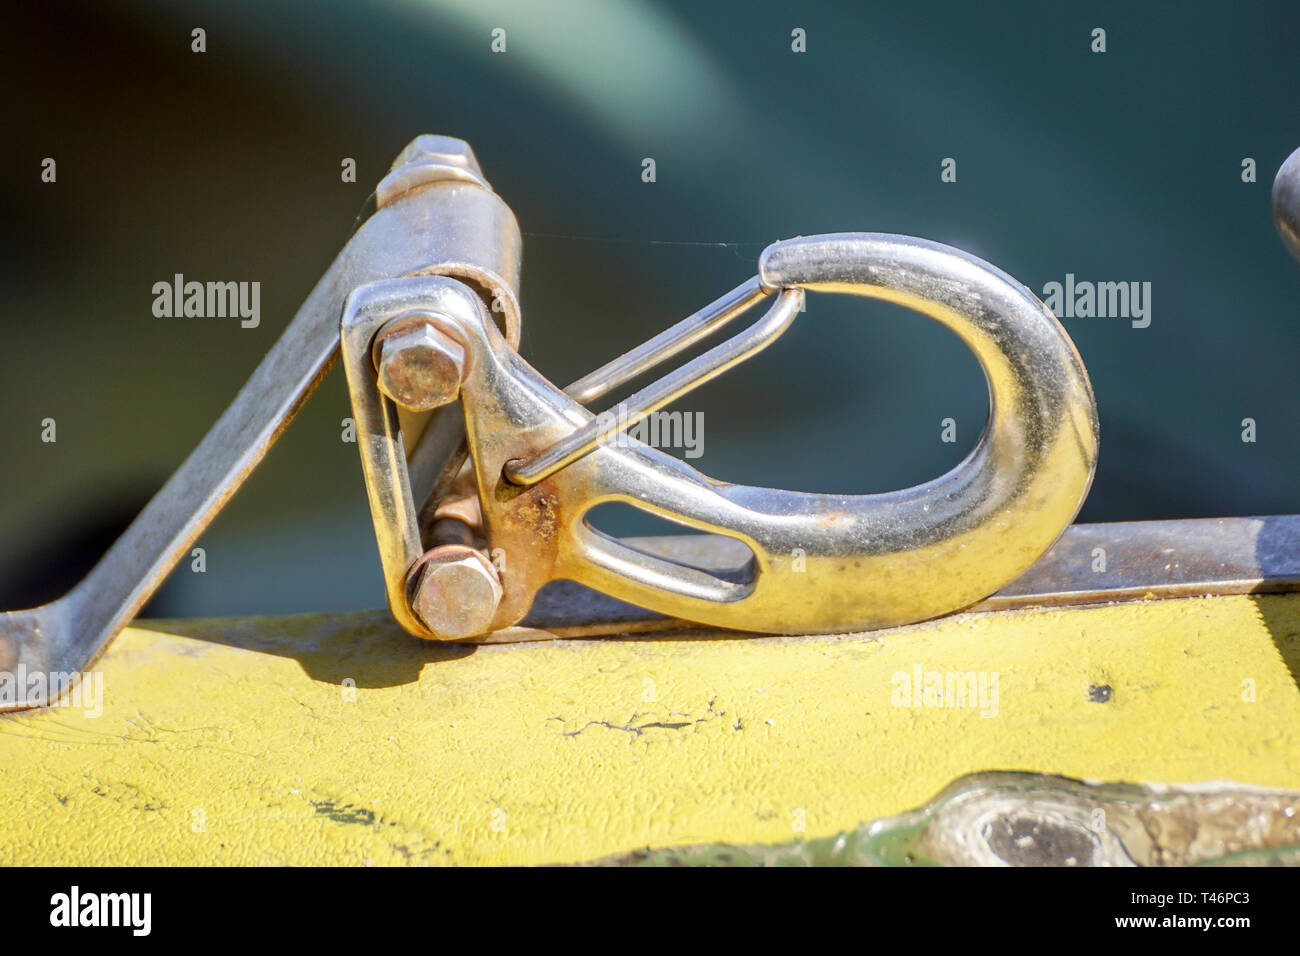 carabiner hook without a climbing rope .Climbing concept. Close up Stock Photo